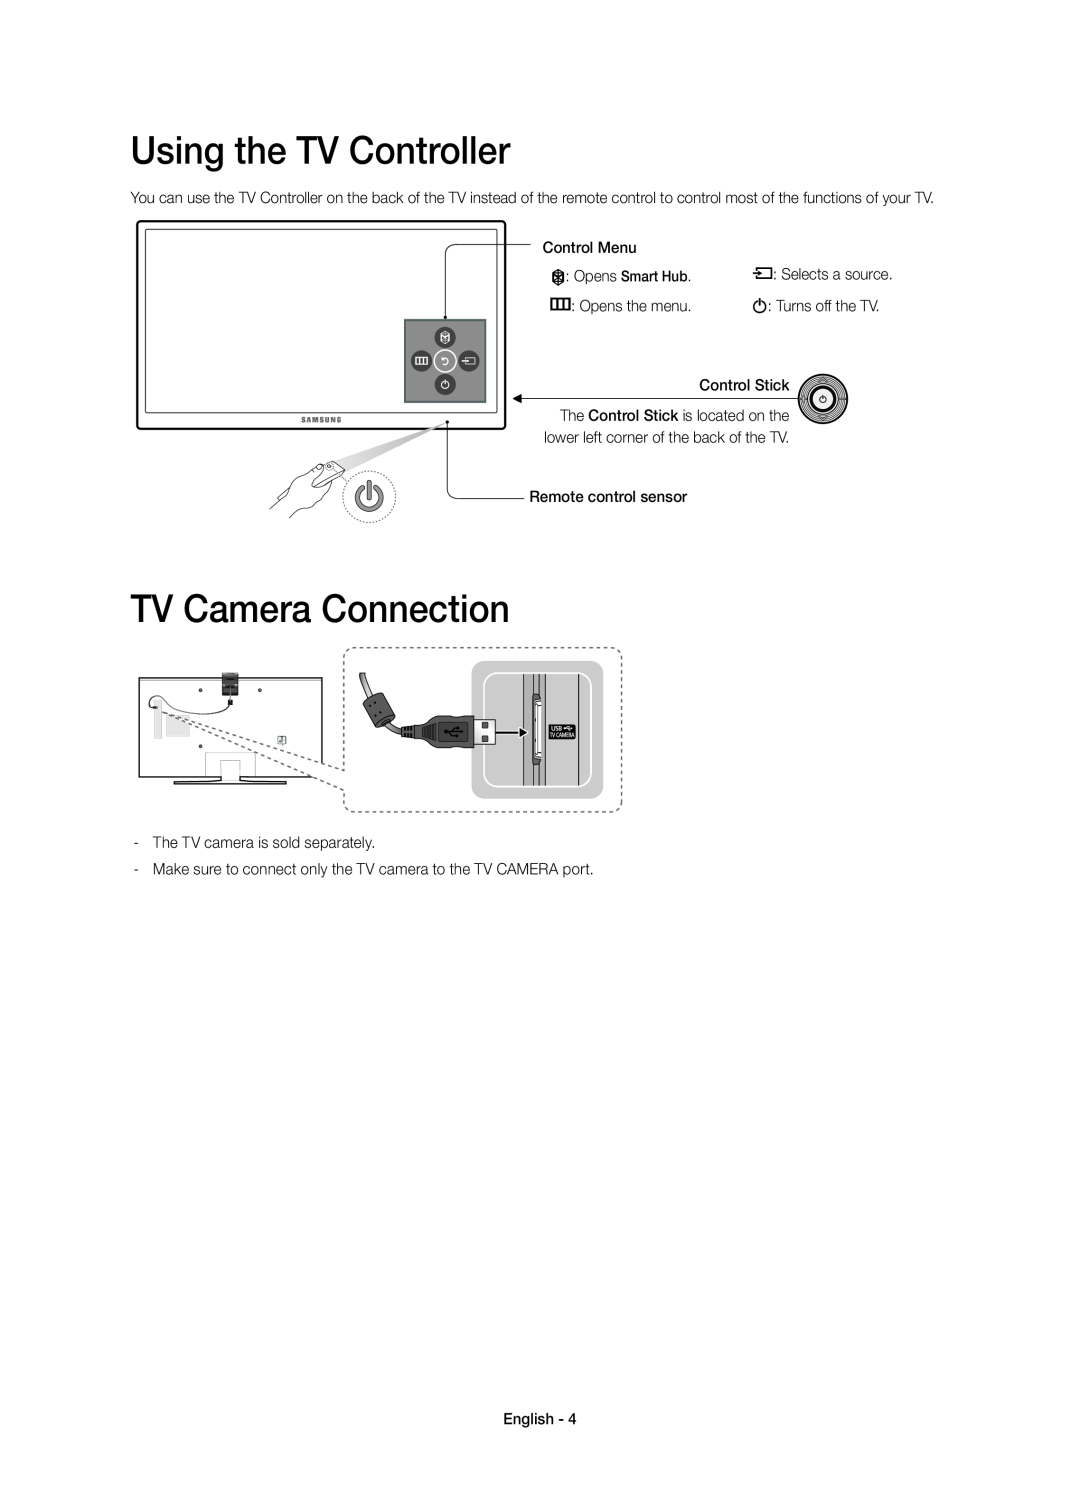 Samsung UE32J5670SUXZG, UE43J5670SUXZG, UE32J5570SUXTK, UE48J5580SUXZG manual Using the TV Controller, TV Camera Connection 